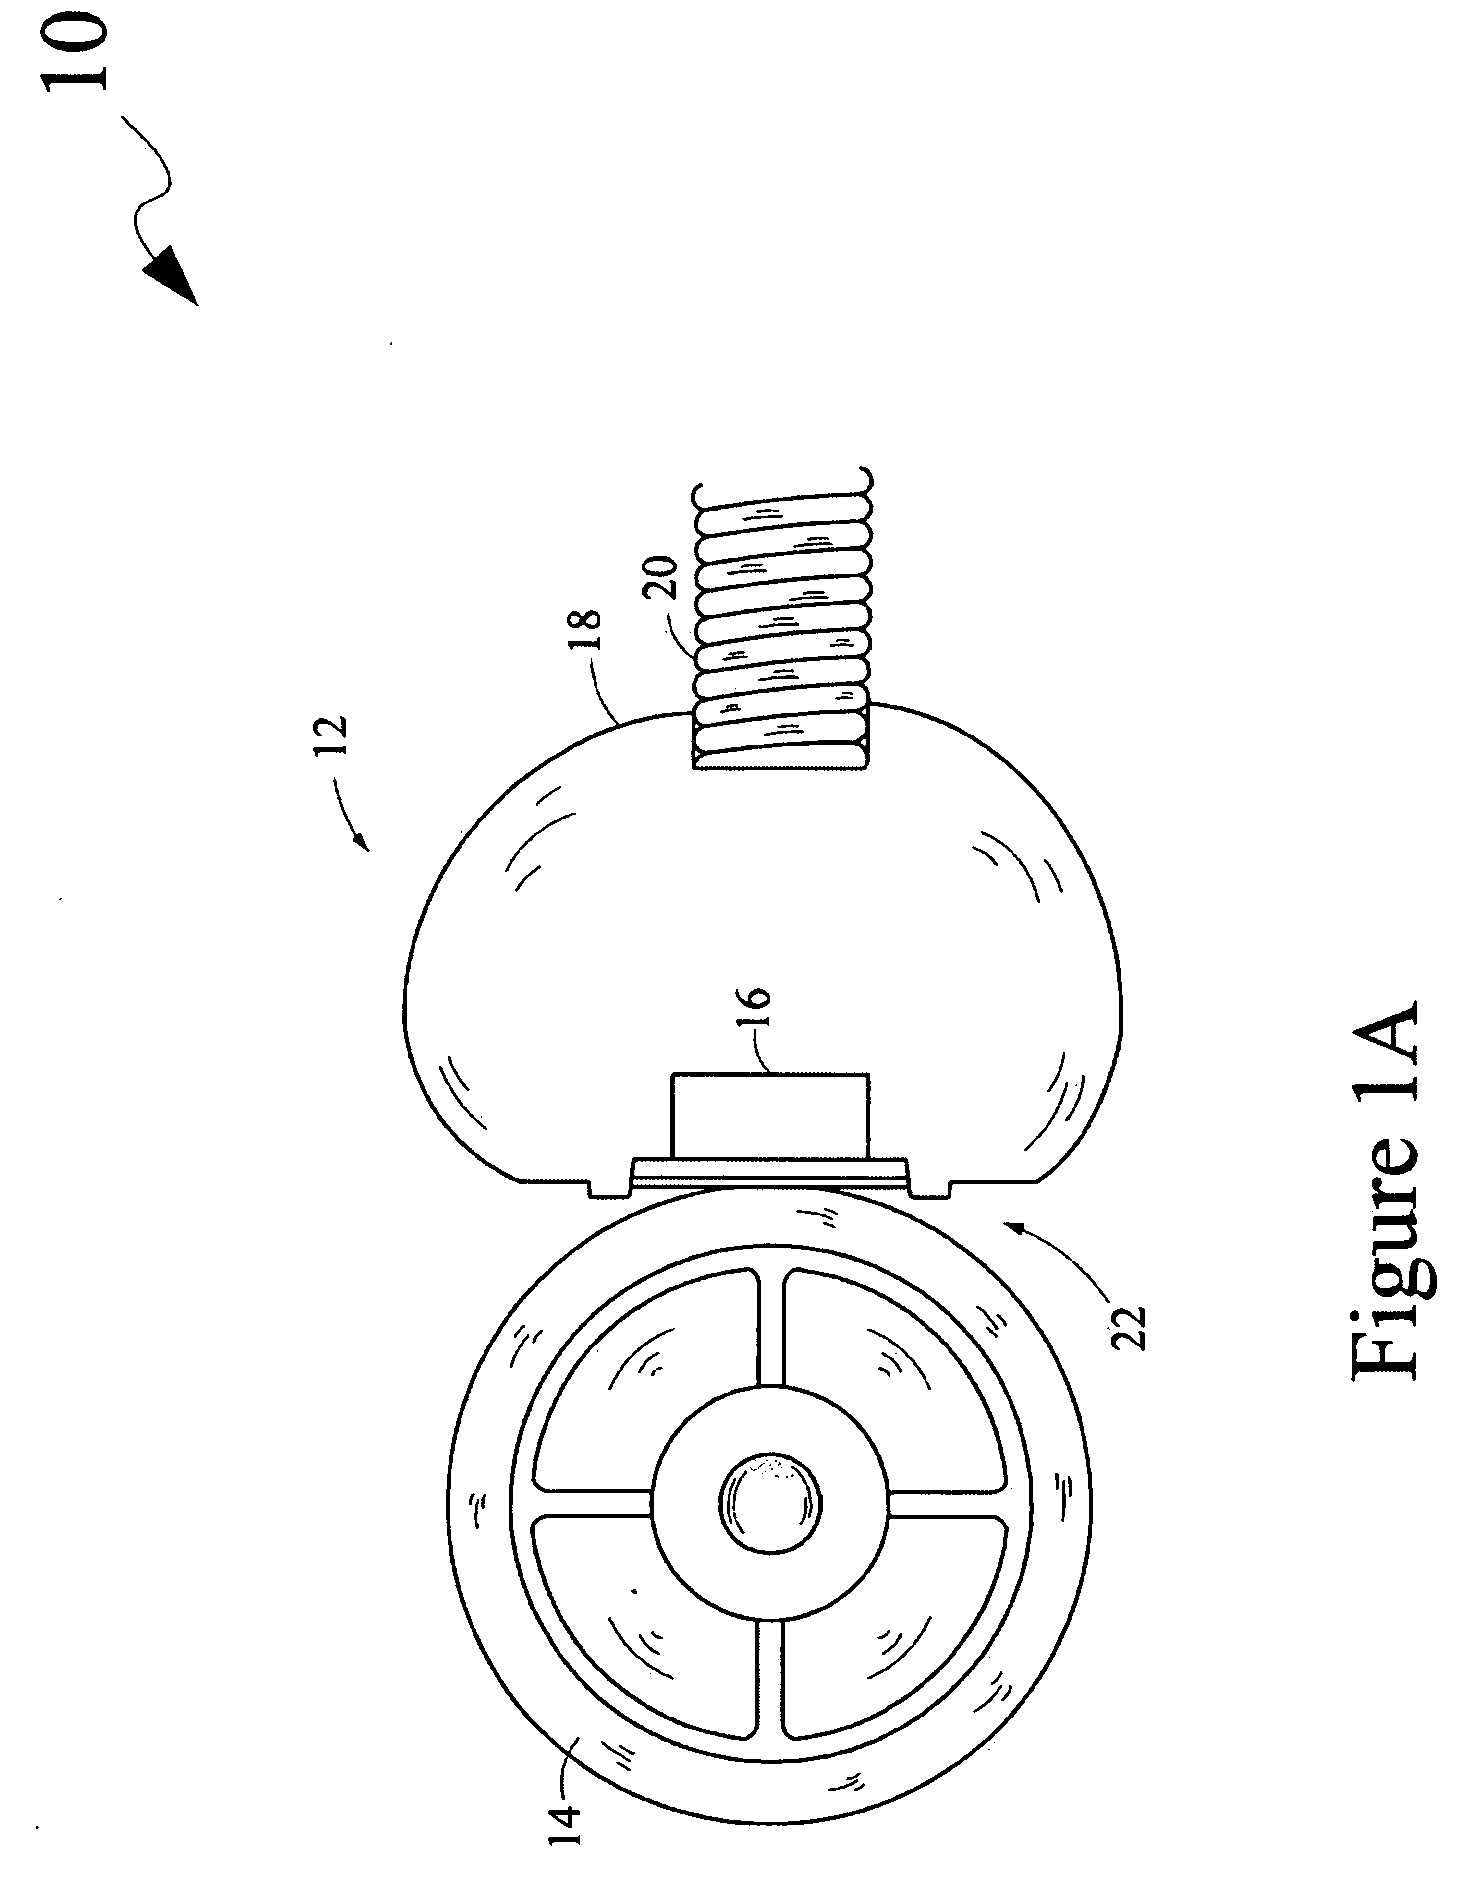 Method For Processing A Media Sheet In A Media Processing Device